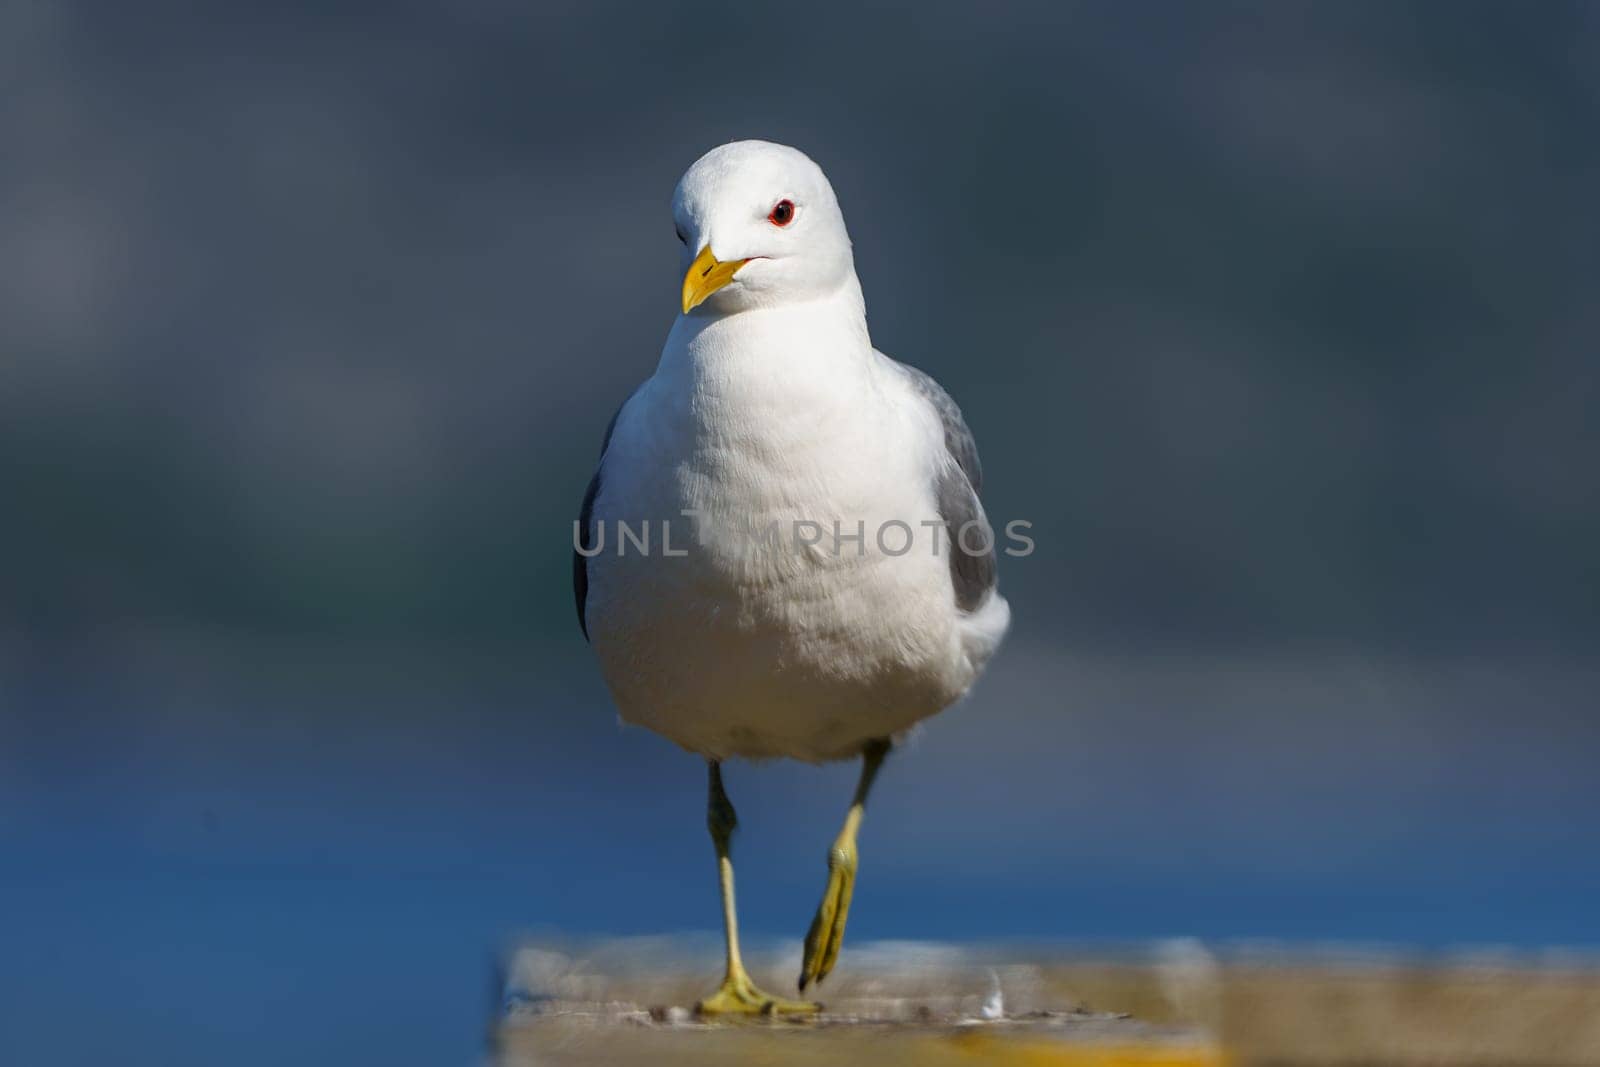 Majestic Northern Norwegian Seagull Close-up Photography with Stunning Feather Details by PhotoTime